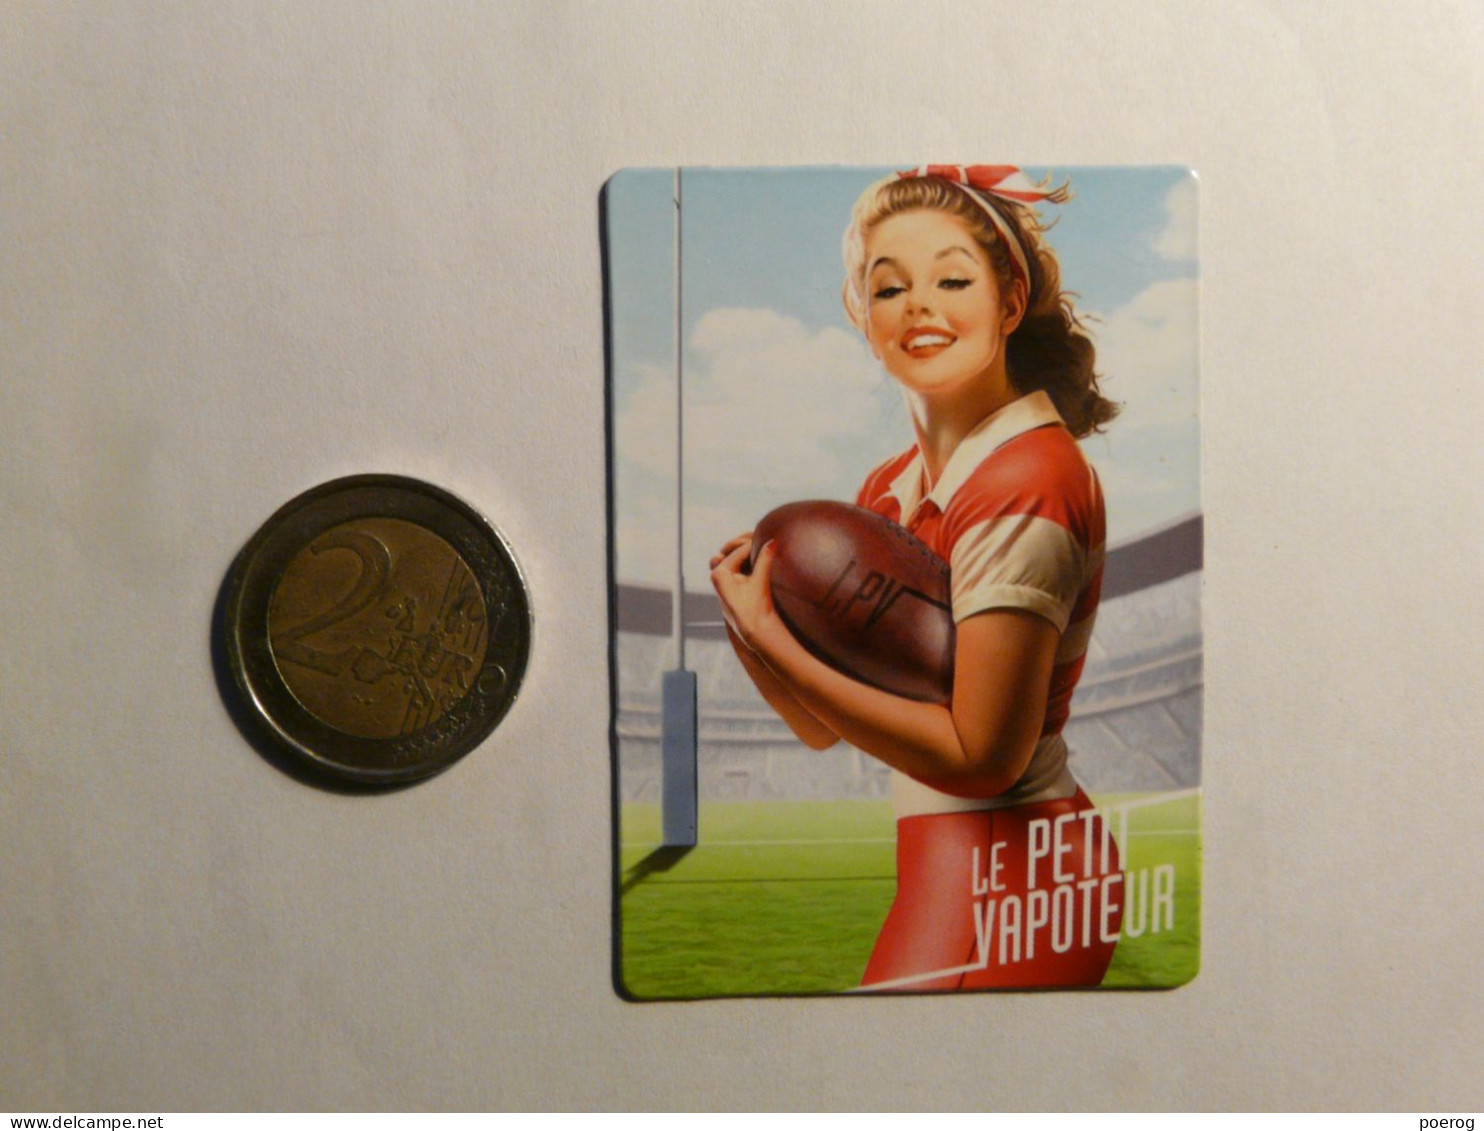 MAGNET PUBLICITAIRE - PIN-UP RUGBY CHERLEADER SUPPORTRICE FAN - LPV LE PETIT VAPOTEUR PINUP SEXY FEMME AIMANT - Reklame